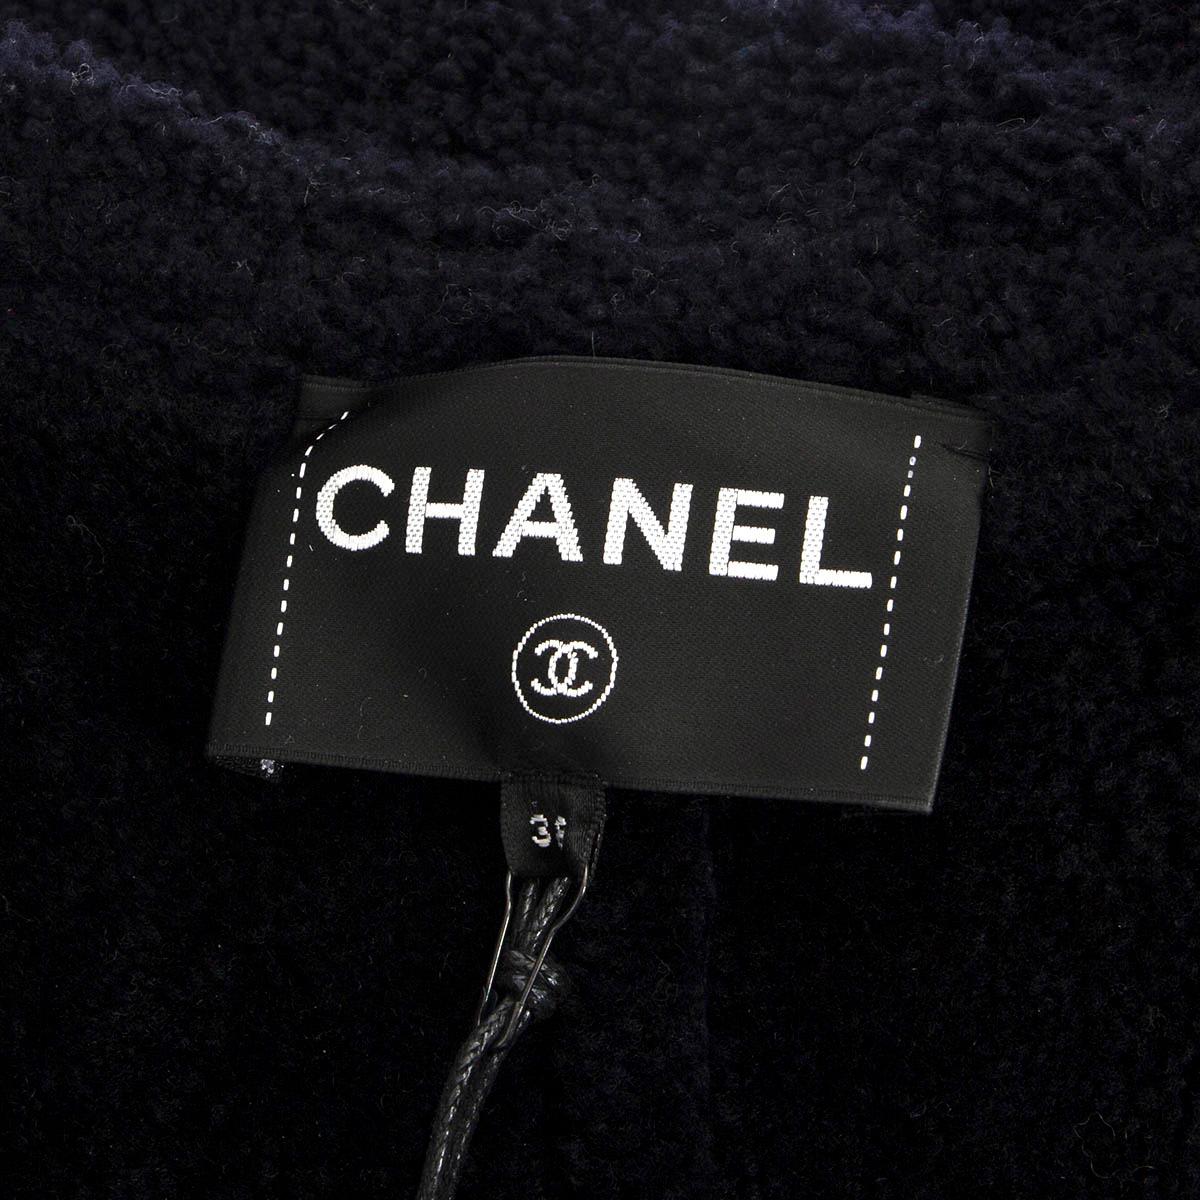 CHANEL navy blue 2018 18A HAMBURG SUEDE & SHEARLING Coat Jacket 38 S For Sale 4